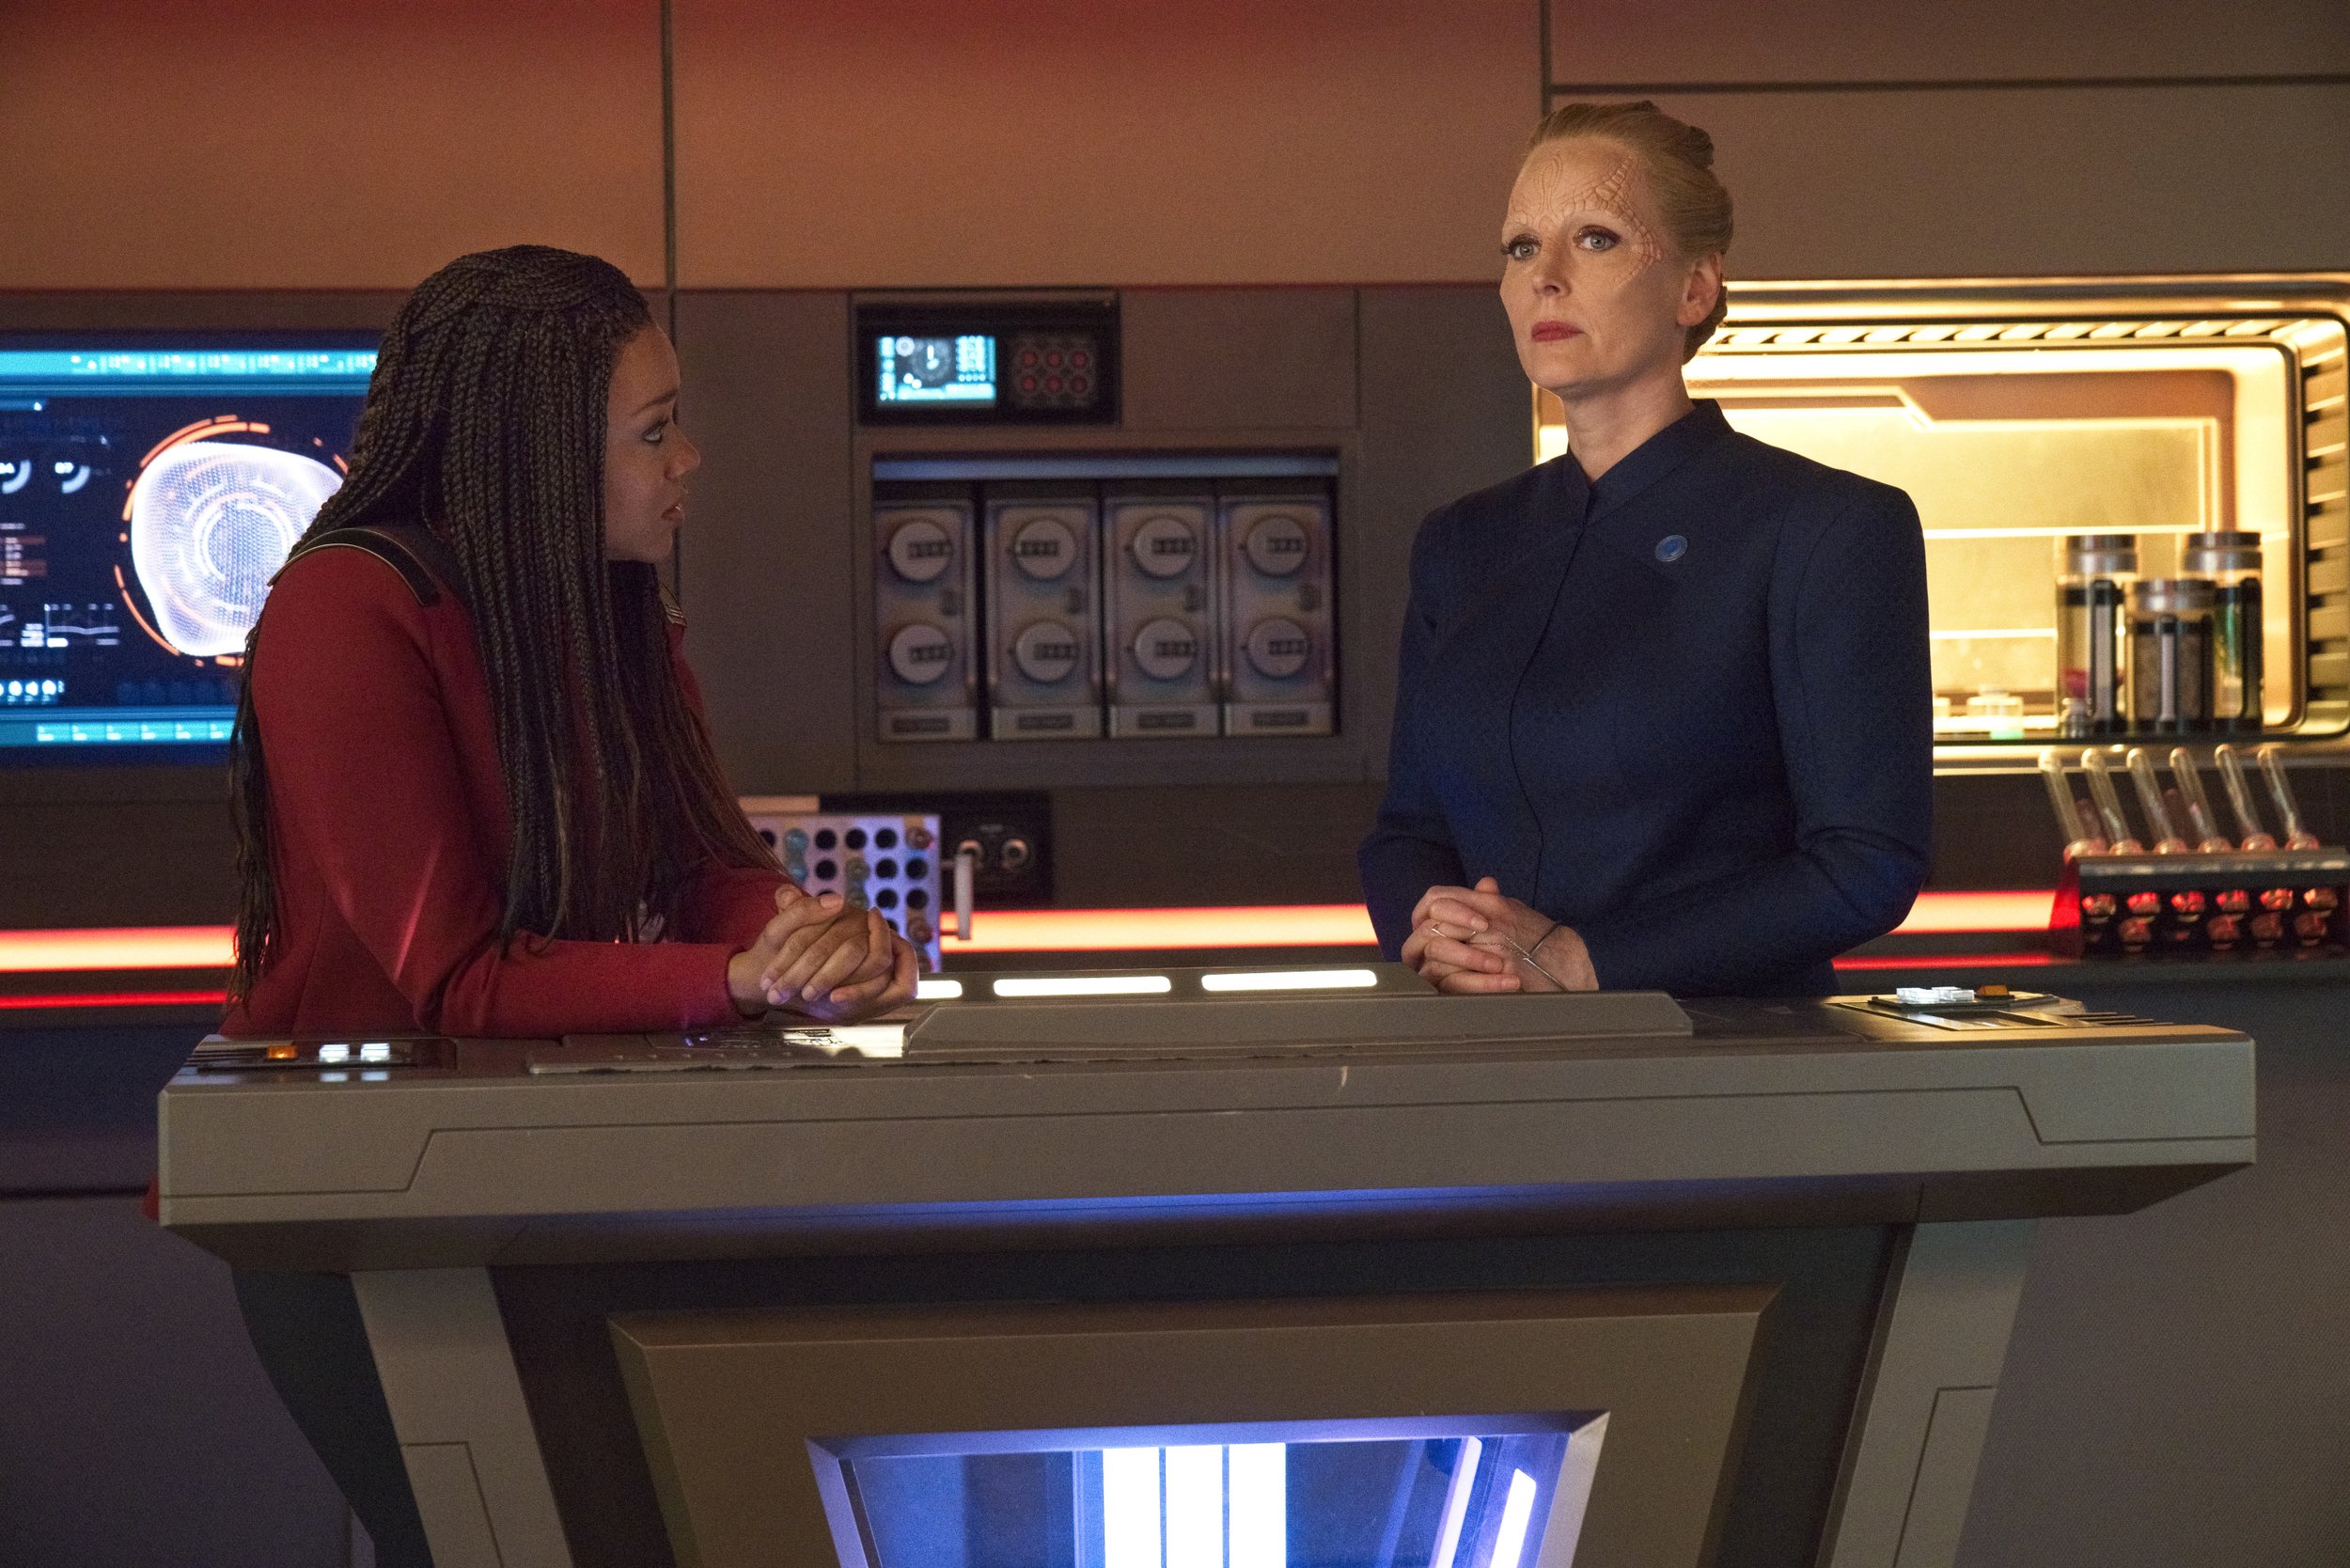   Pictured: Sonequa Martin Green as Burnham and Chelah Horsdal as President Laira Rillak of the Paramount+ original series STAR TREK: DISCOVERY. Photo Cr: Michael Gibson/Paramount+ (C) 2021 CBS Interactive. All Rights Reserved.  